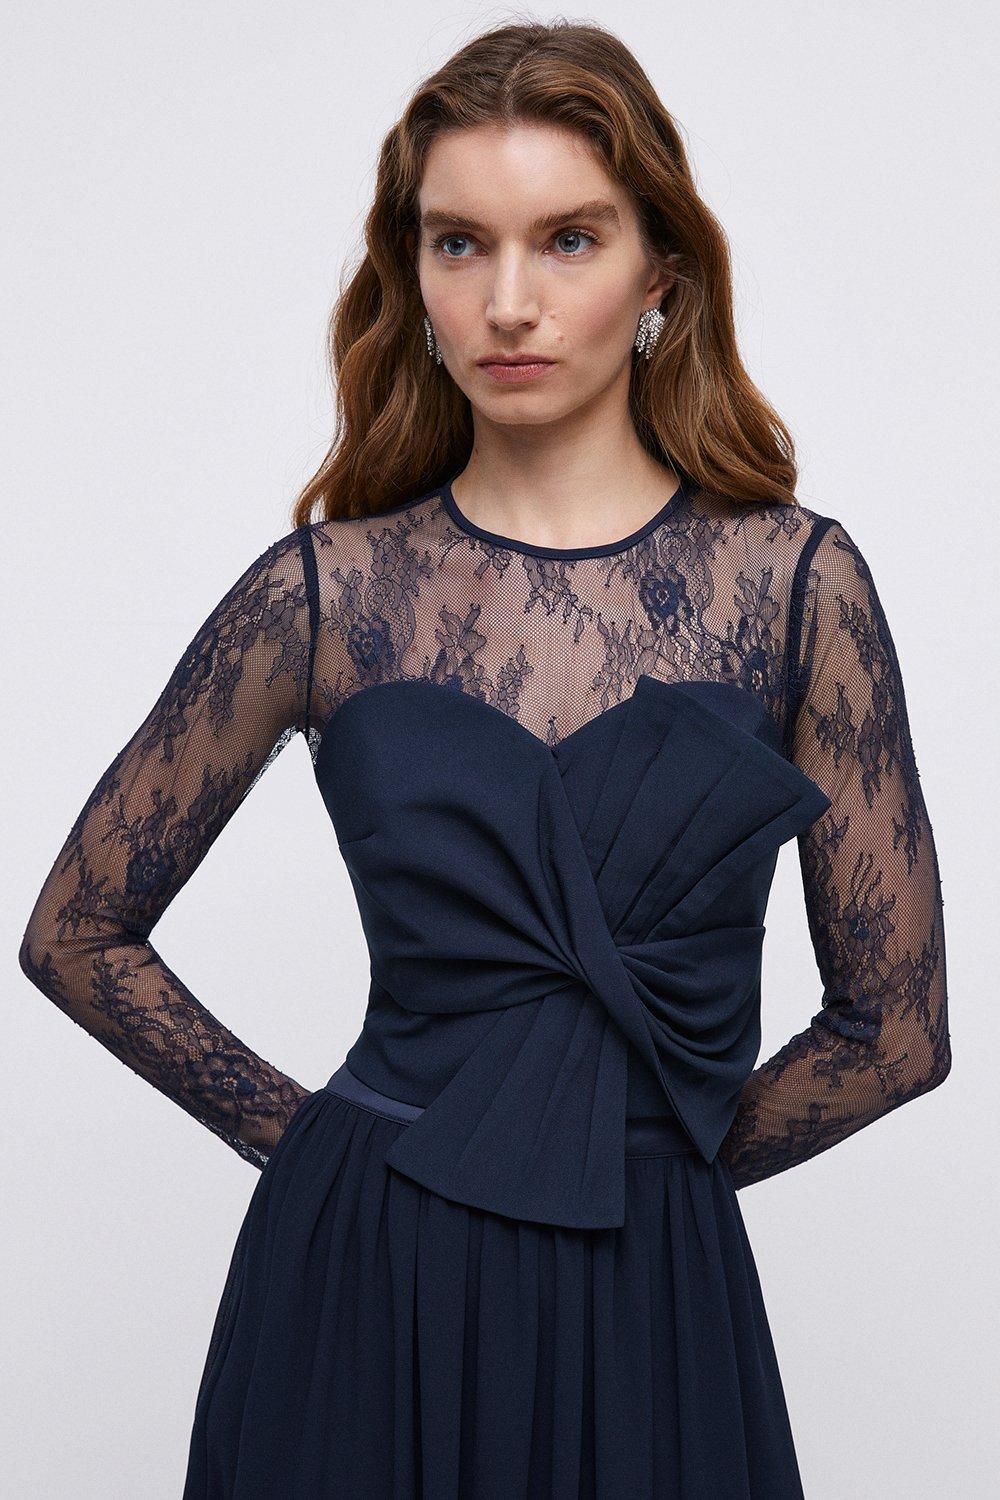 Crepe Statement Bow Long Sleeve Lace Bridesmaids Top - Navy